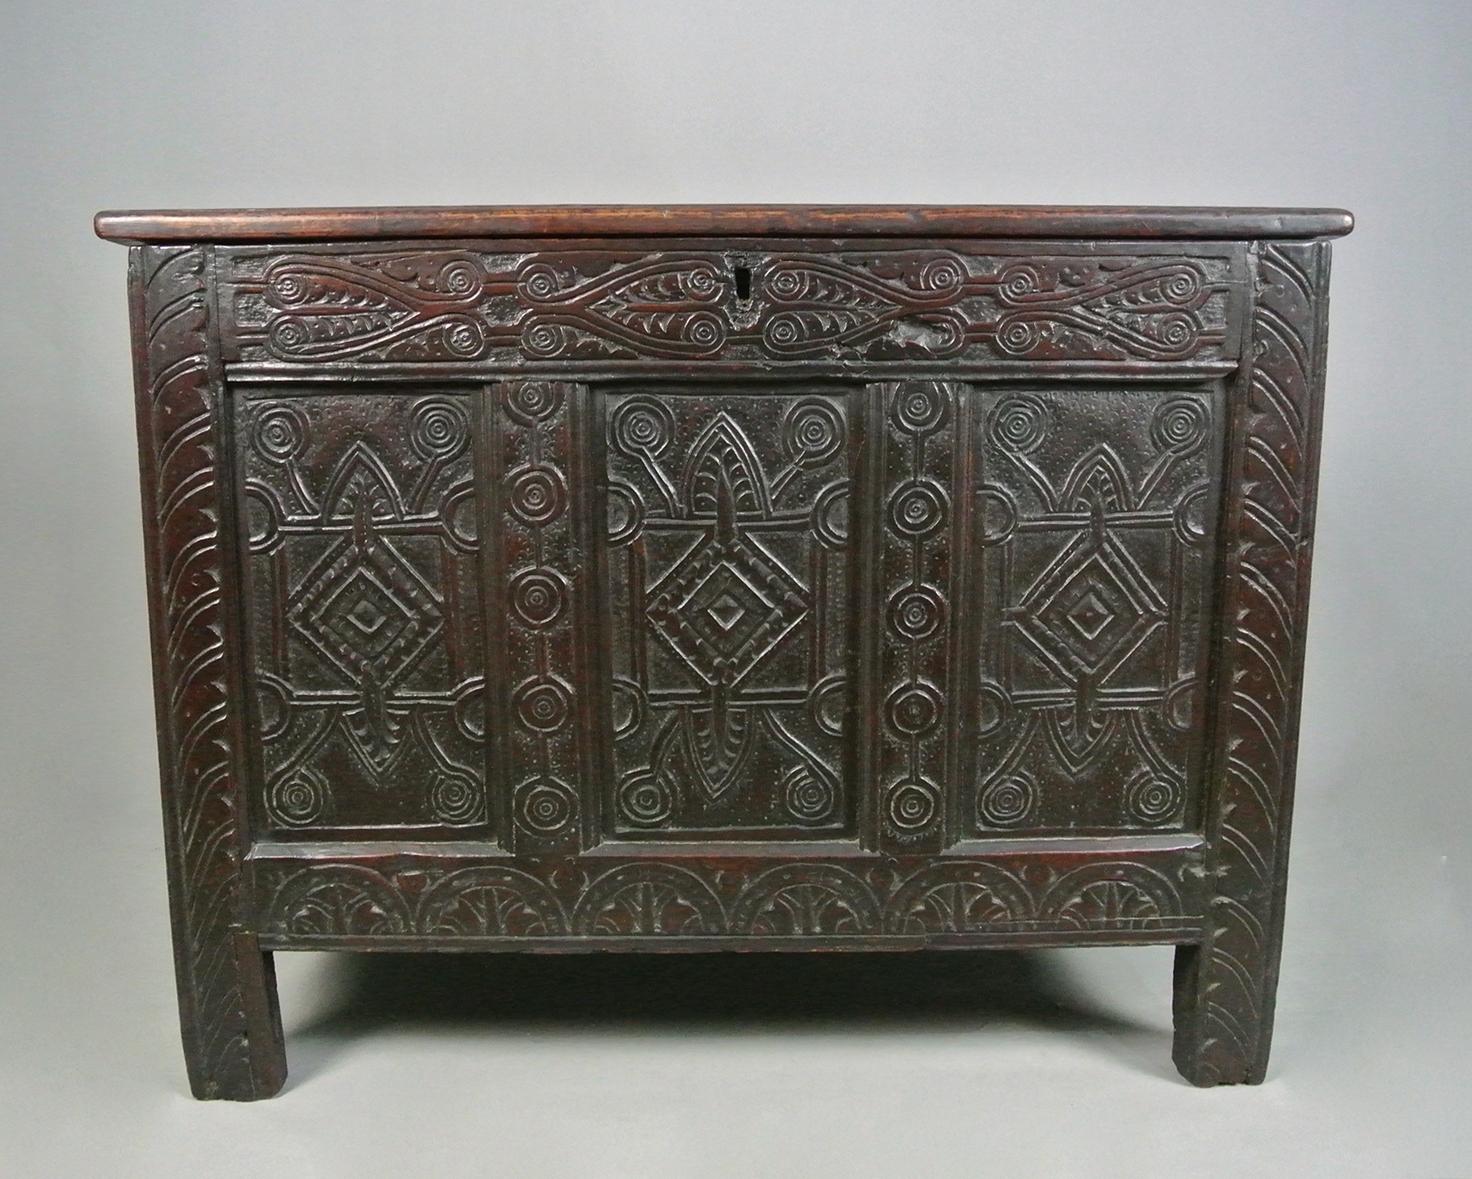 With a lovely colour and rich patina, this superb English oak coffer dates from c. 1600.  Set on tall feet and of a very good size and rarely seen compact proportion, this would be a perfect linen box at the end of a bed or a beautiful focal point